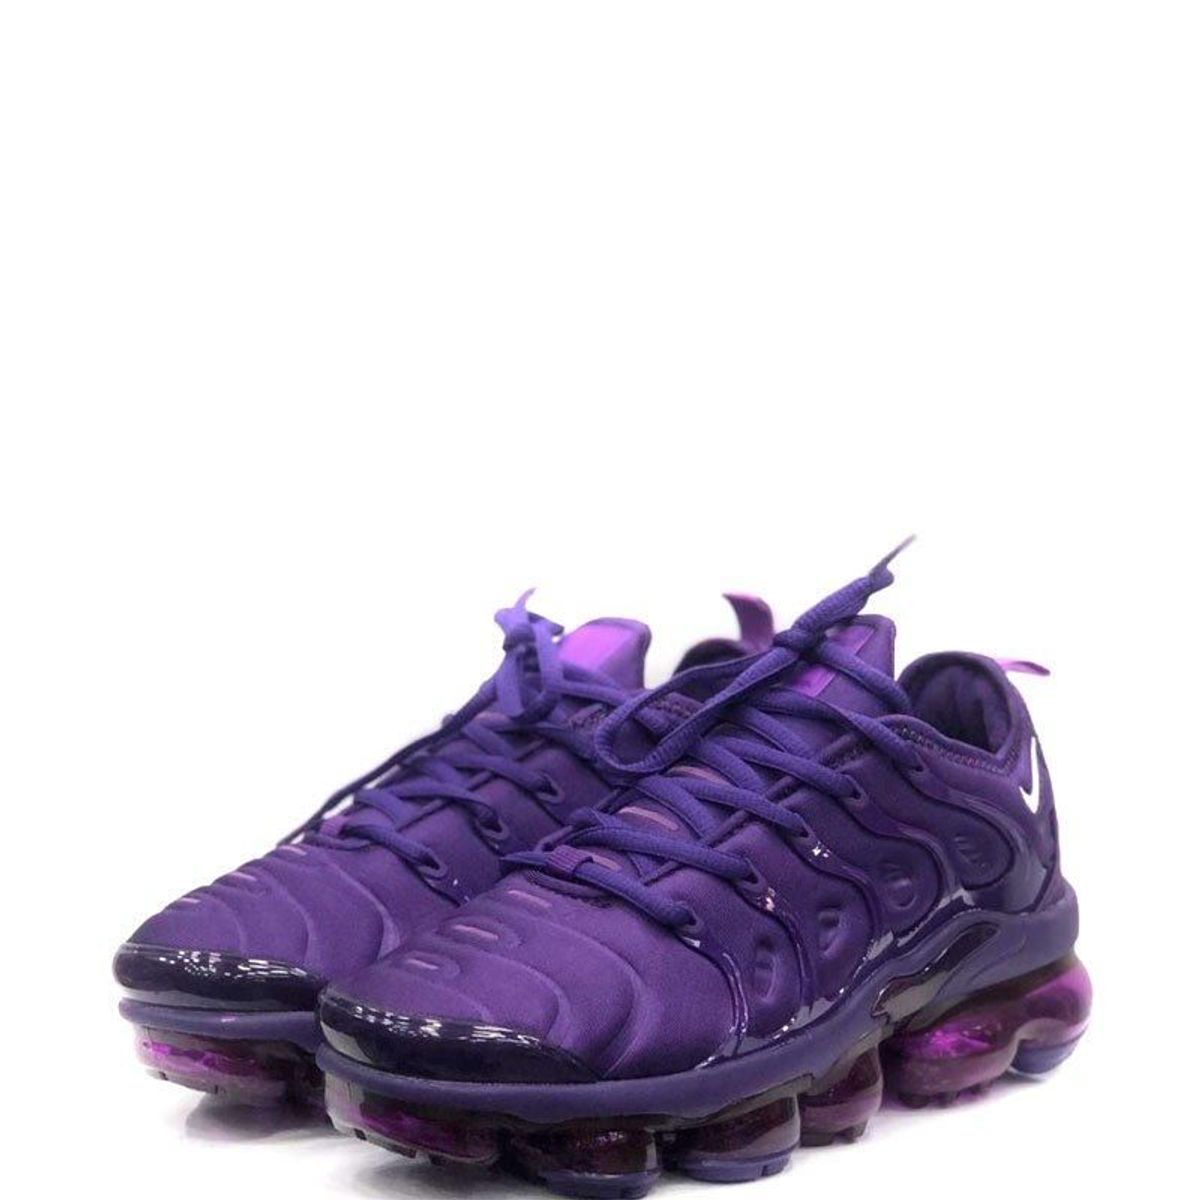 Nike Air VaporMax Plus Sequoia The Site of the Sneaker